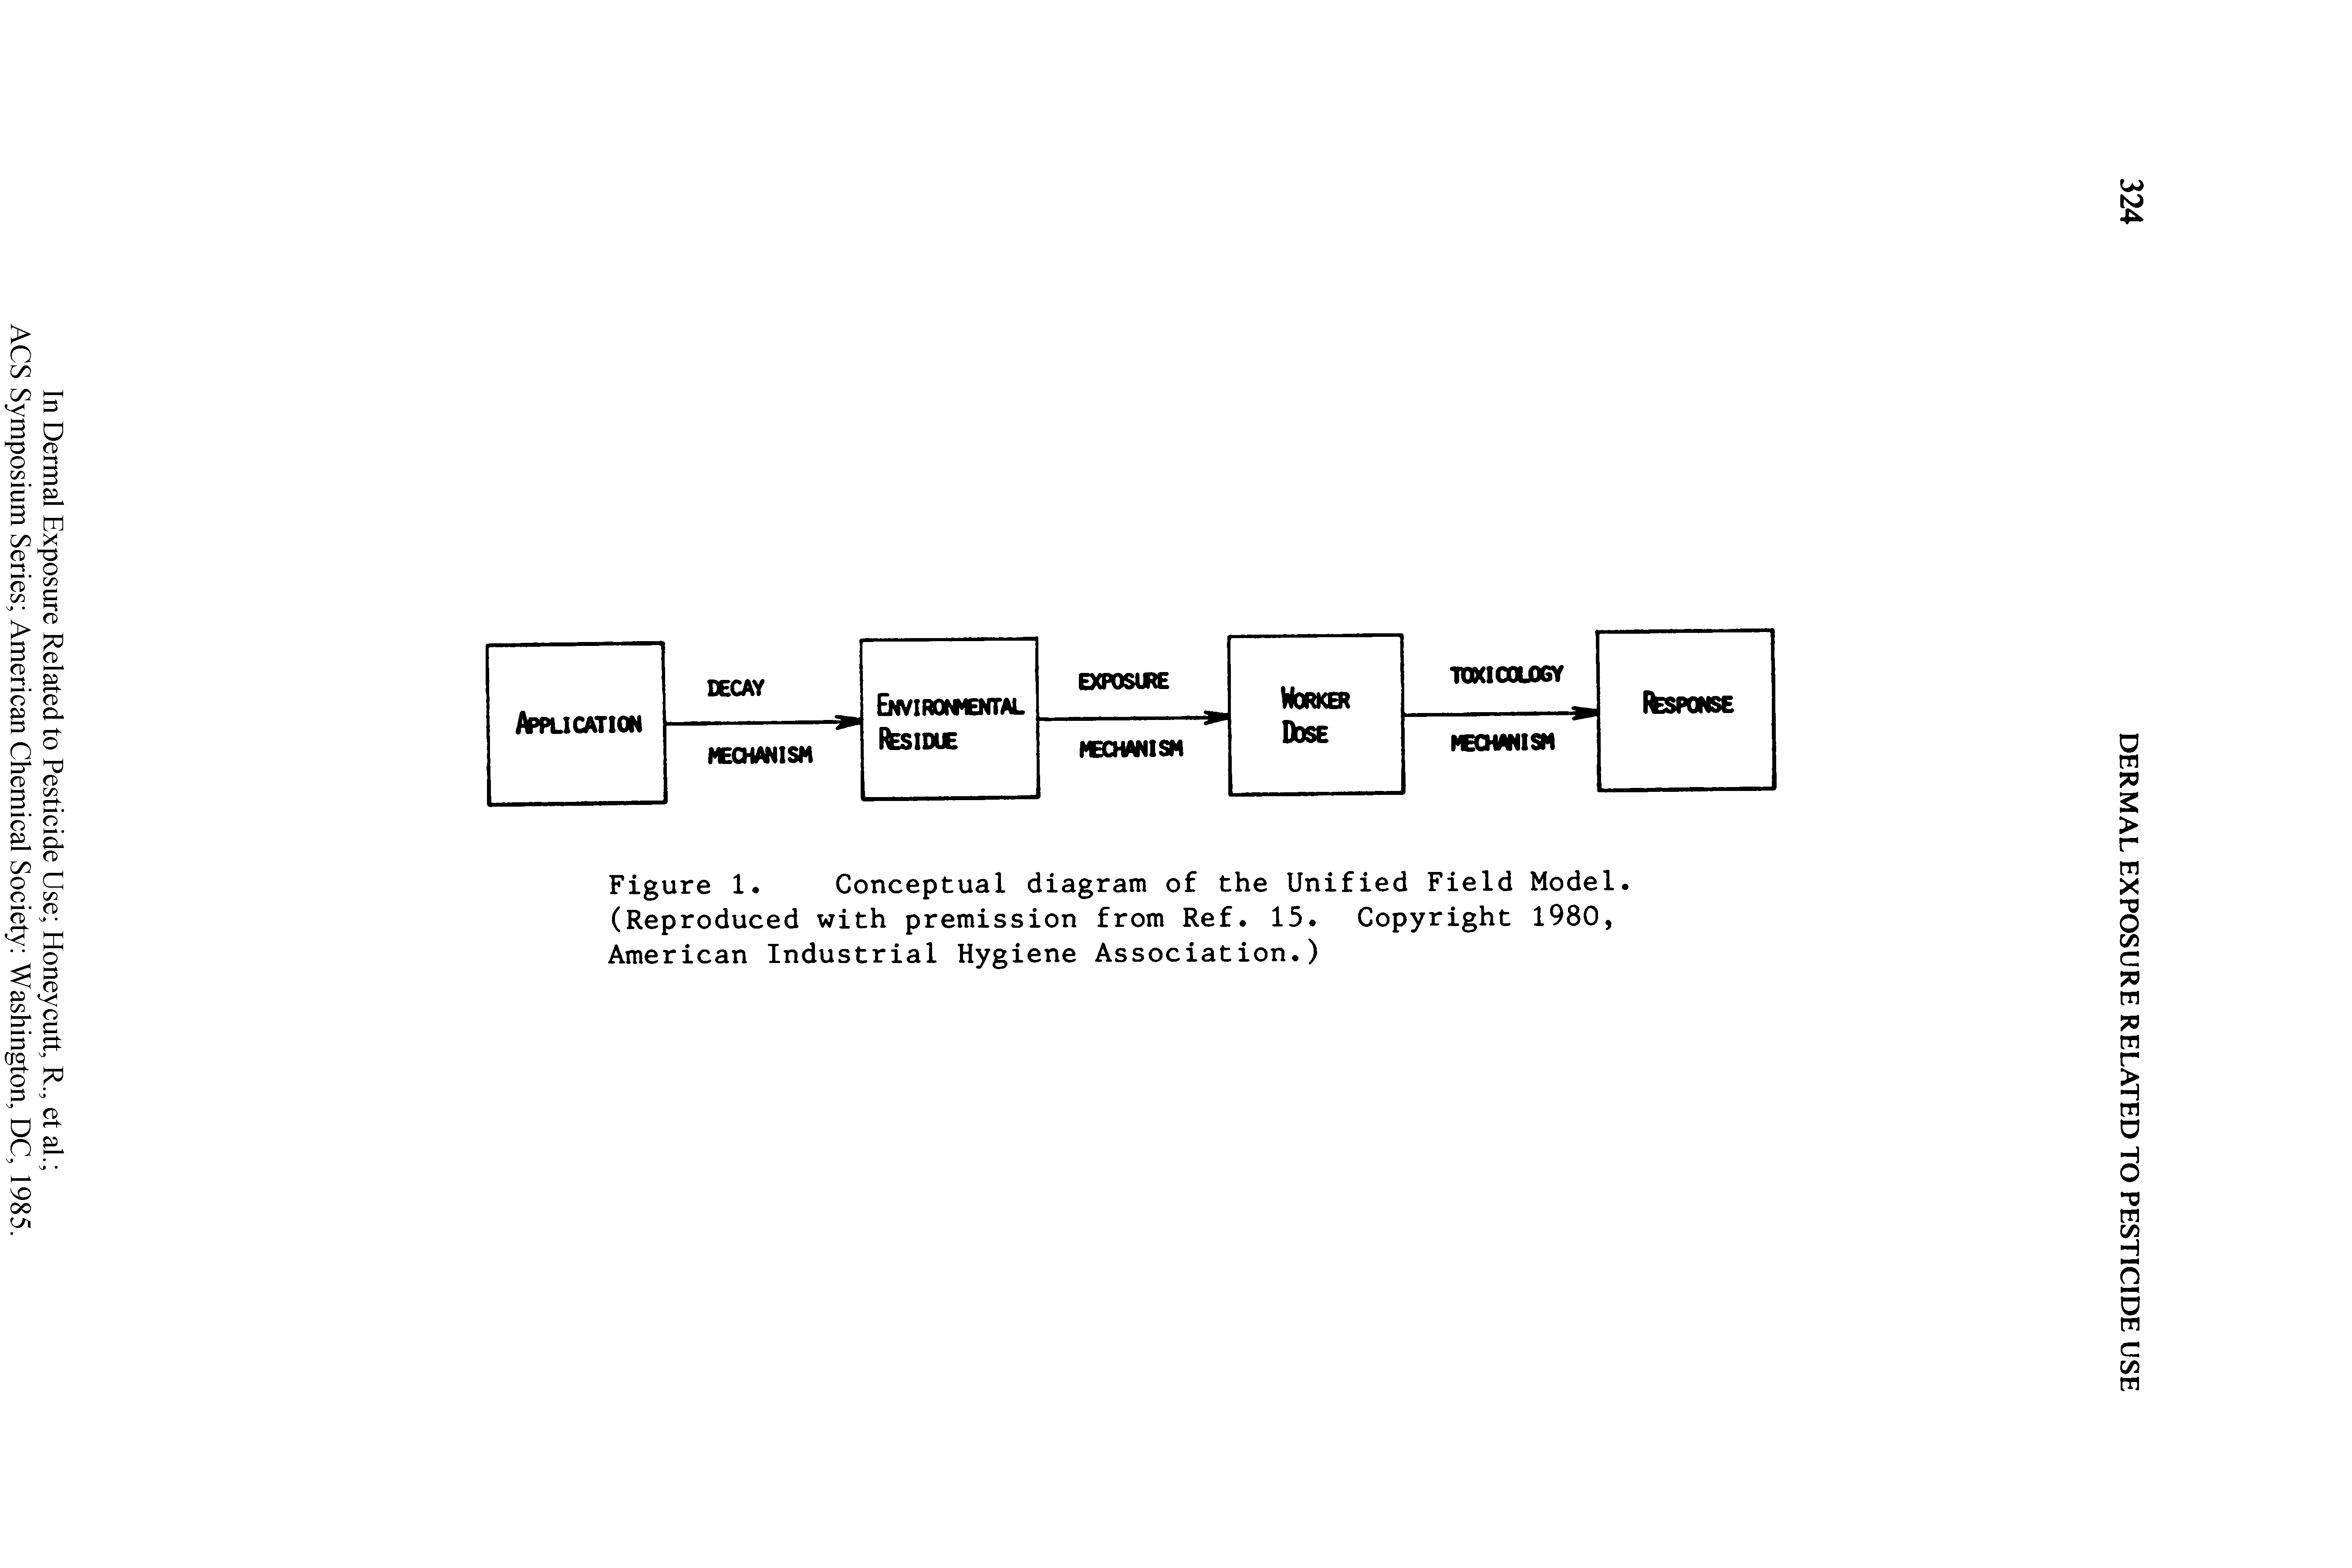 Figure 1. Conceptual diagram of the Unified Field Model. (Reproduced with premission from Ref. 15. Copyright 1980, American Industrial Hygiene Association.)...